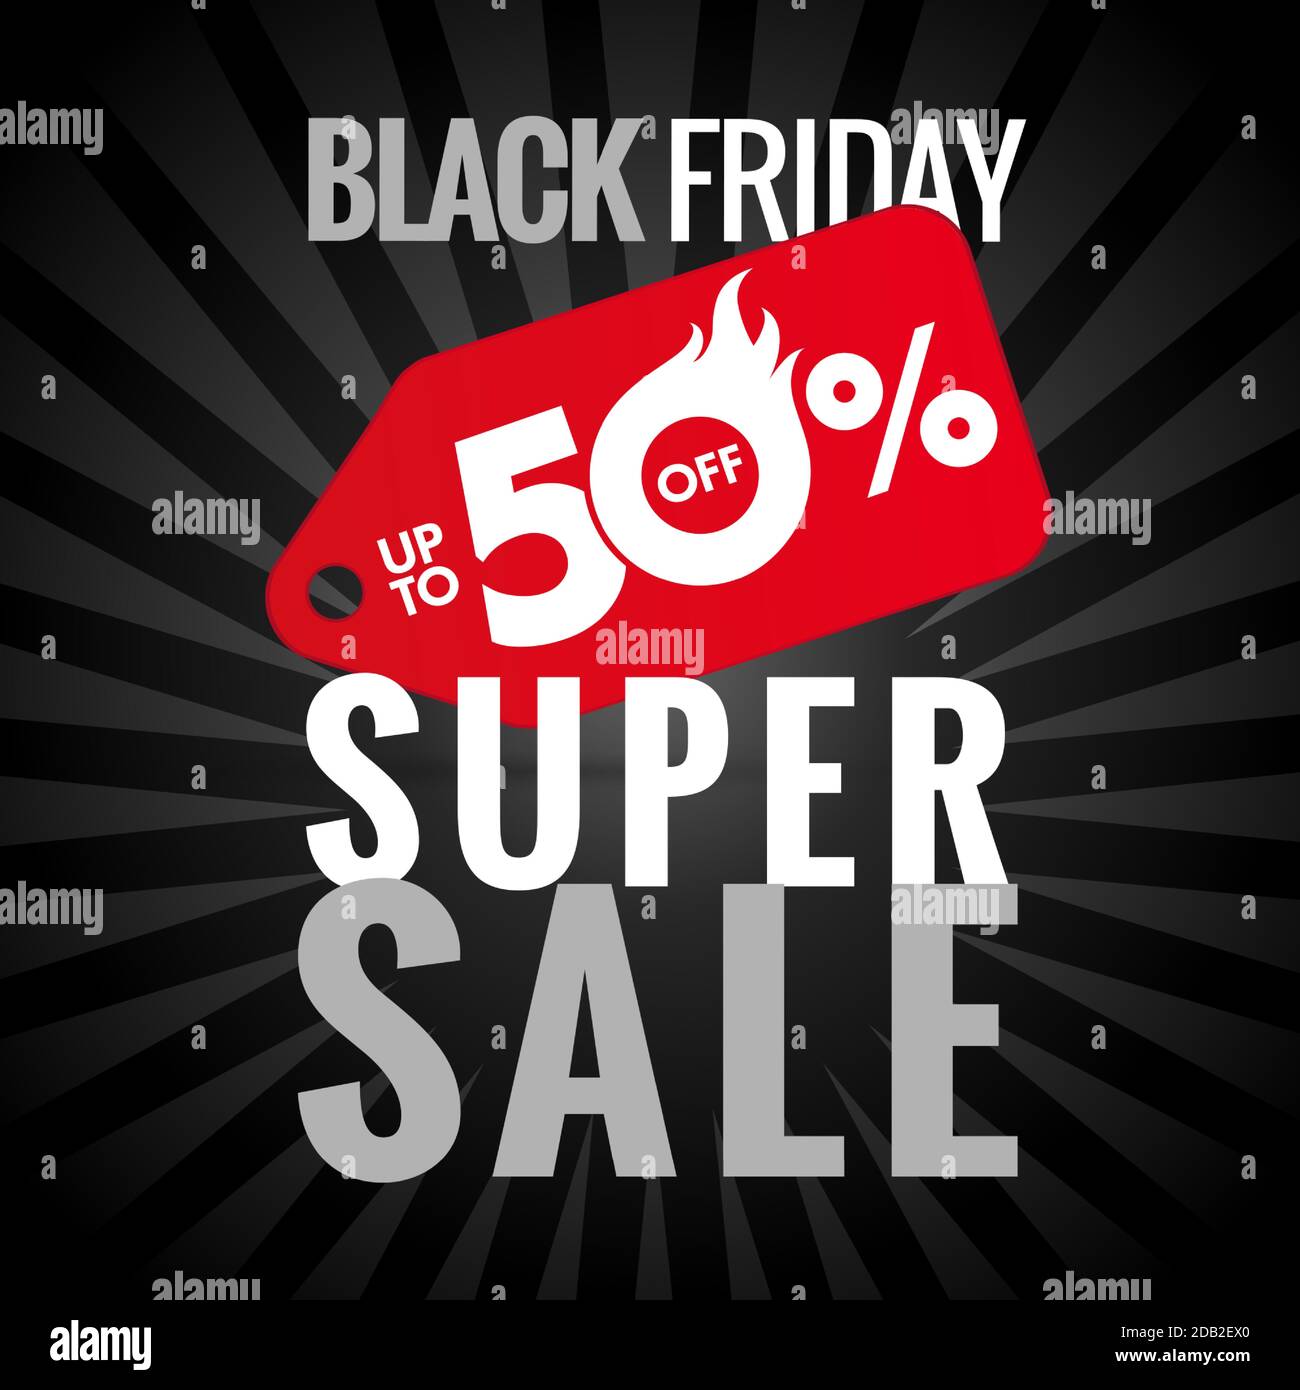 Black Friday sale banner with 50% off discount red label, deal sticker design. 10%, 20%, 30%, 40%, 60%, 70% off for special offer flyer poster vector Stock Vector